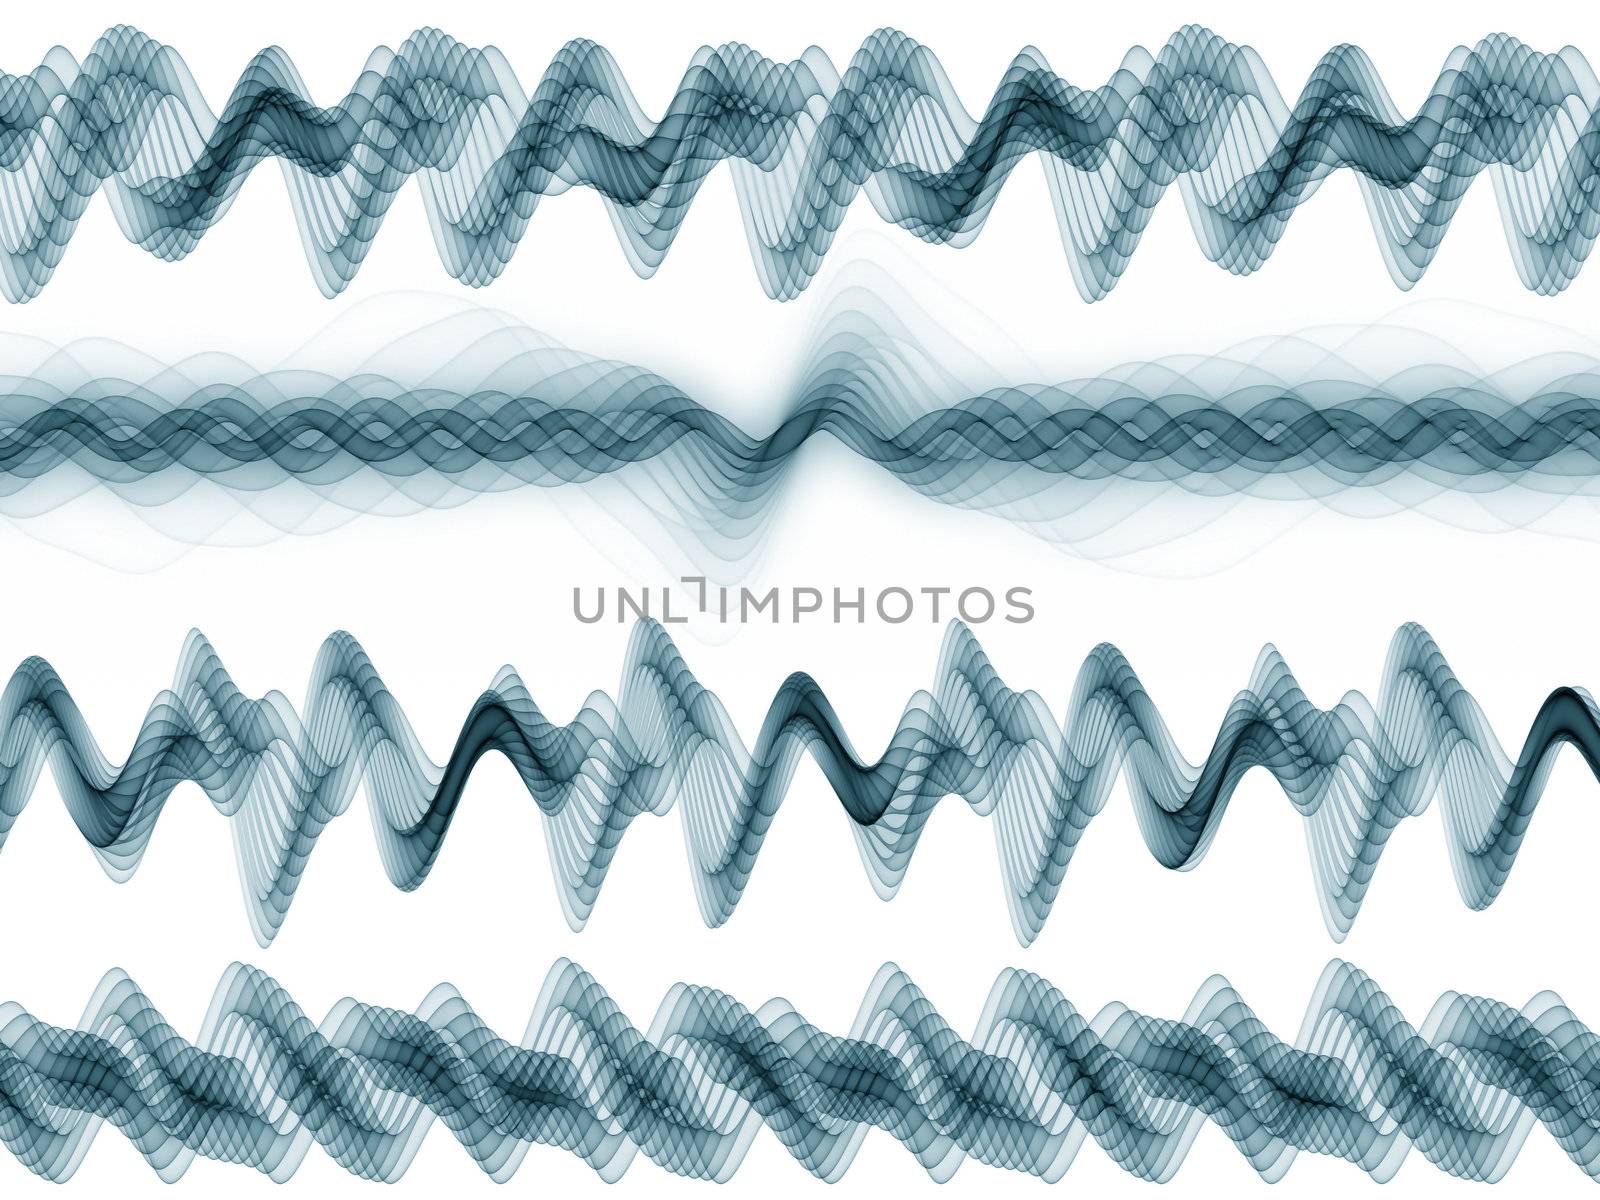 Abstract sound wave rendered in teal against white background